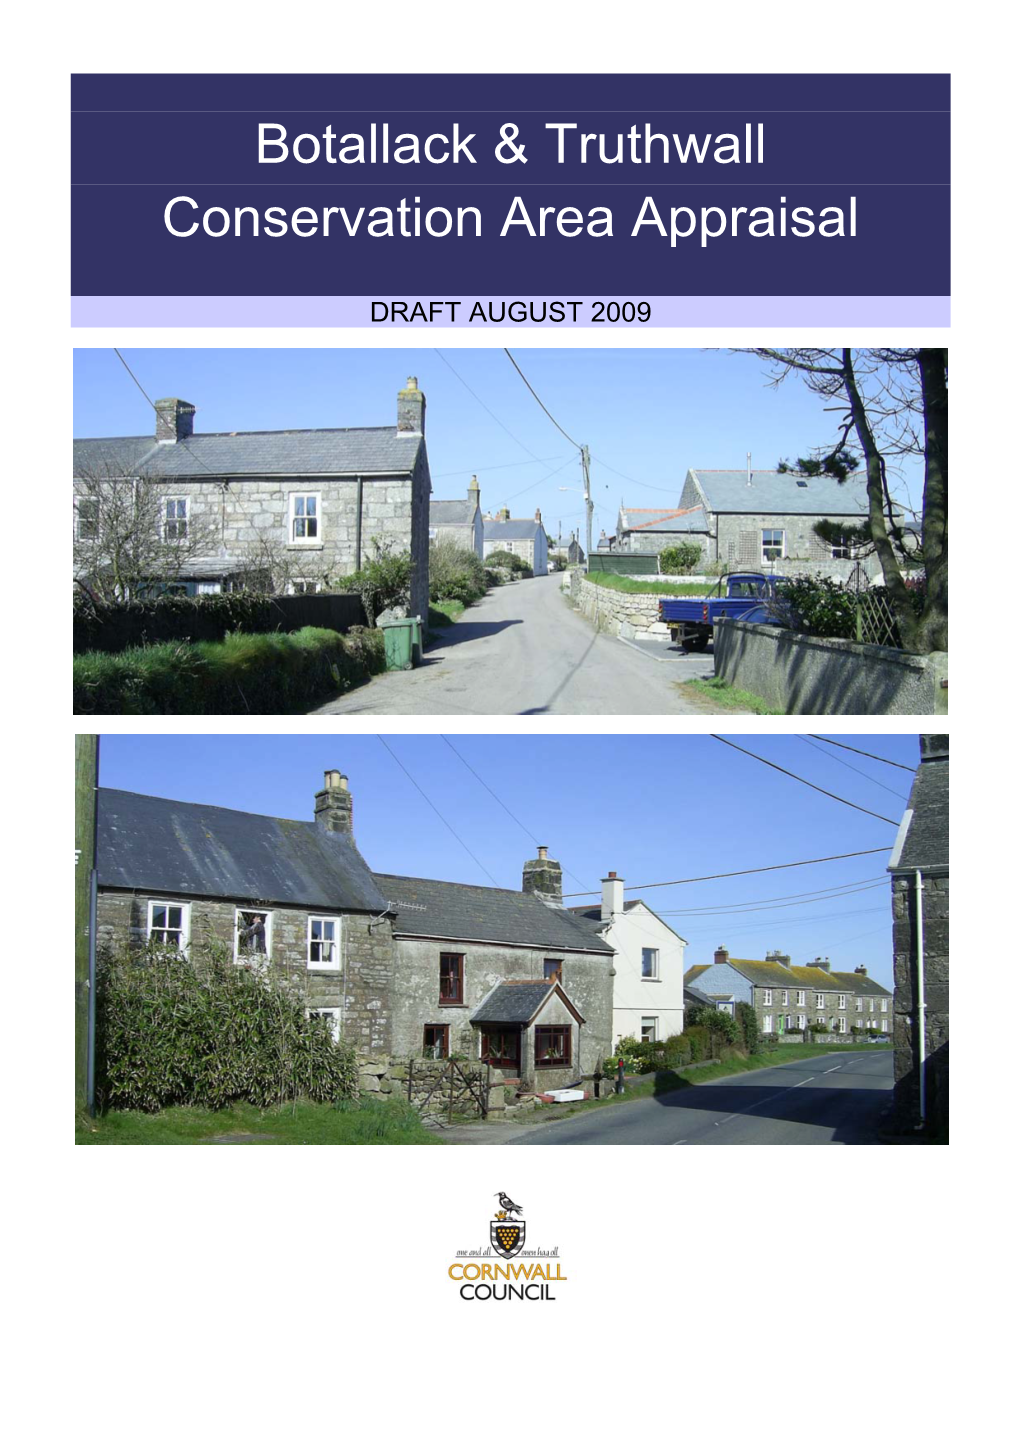 Botallack & Truthwall Conservation Area Appraisal